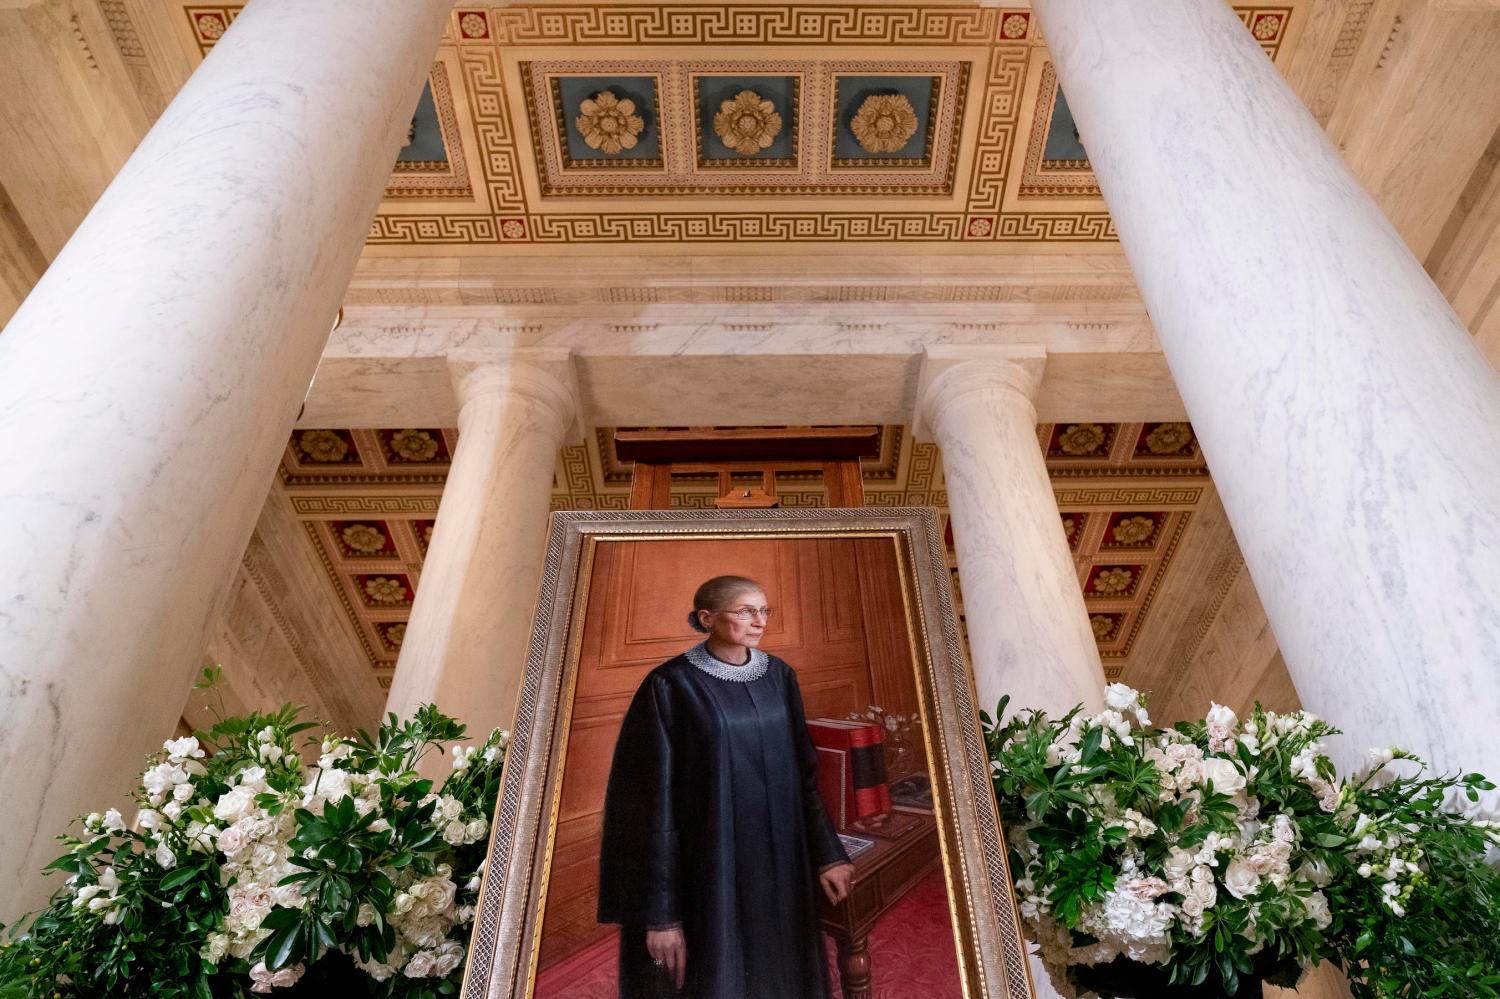 Sep 23, 2020; Washington, DC, USA; A 2016 portrait of Associate Justice Ruth Bader Ginsburg by artist Constance P. Beaty is displayed in the Great Hall following a private ceremony for her at the Supreme Court in Washington, Wednesday, Sept. 23, 2020. Ginsburg, 87, died of cancer on Sept. 18. Mandatory Credit: Andrew Harnik/Pool Photo-USA TODAY NETWORK